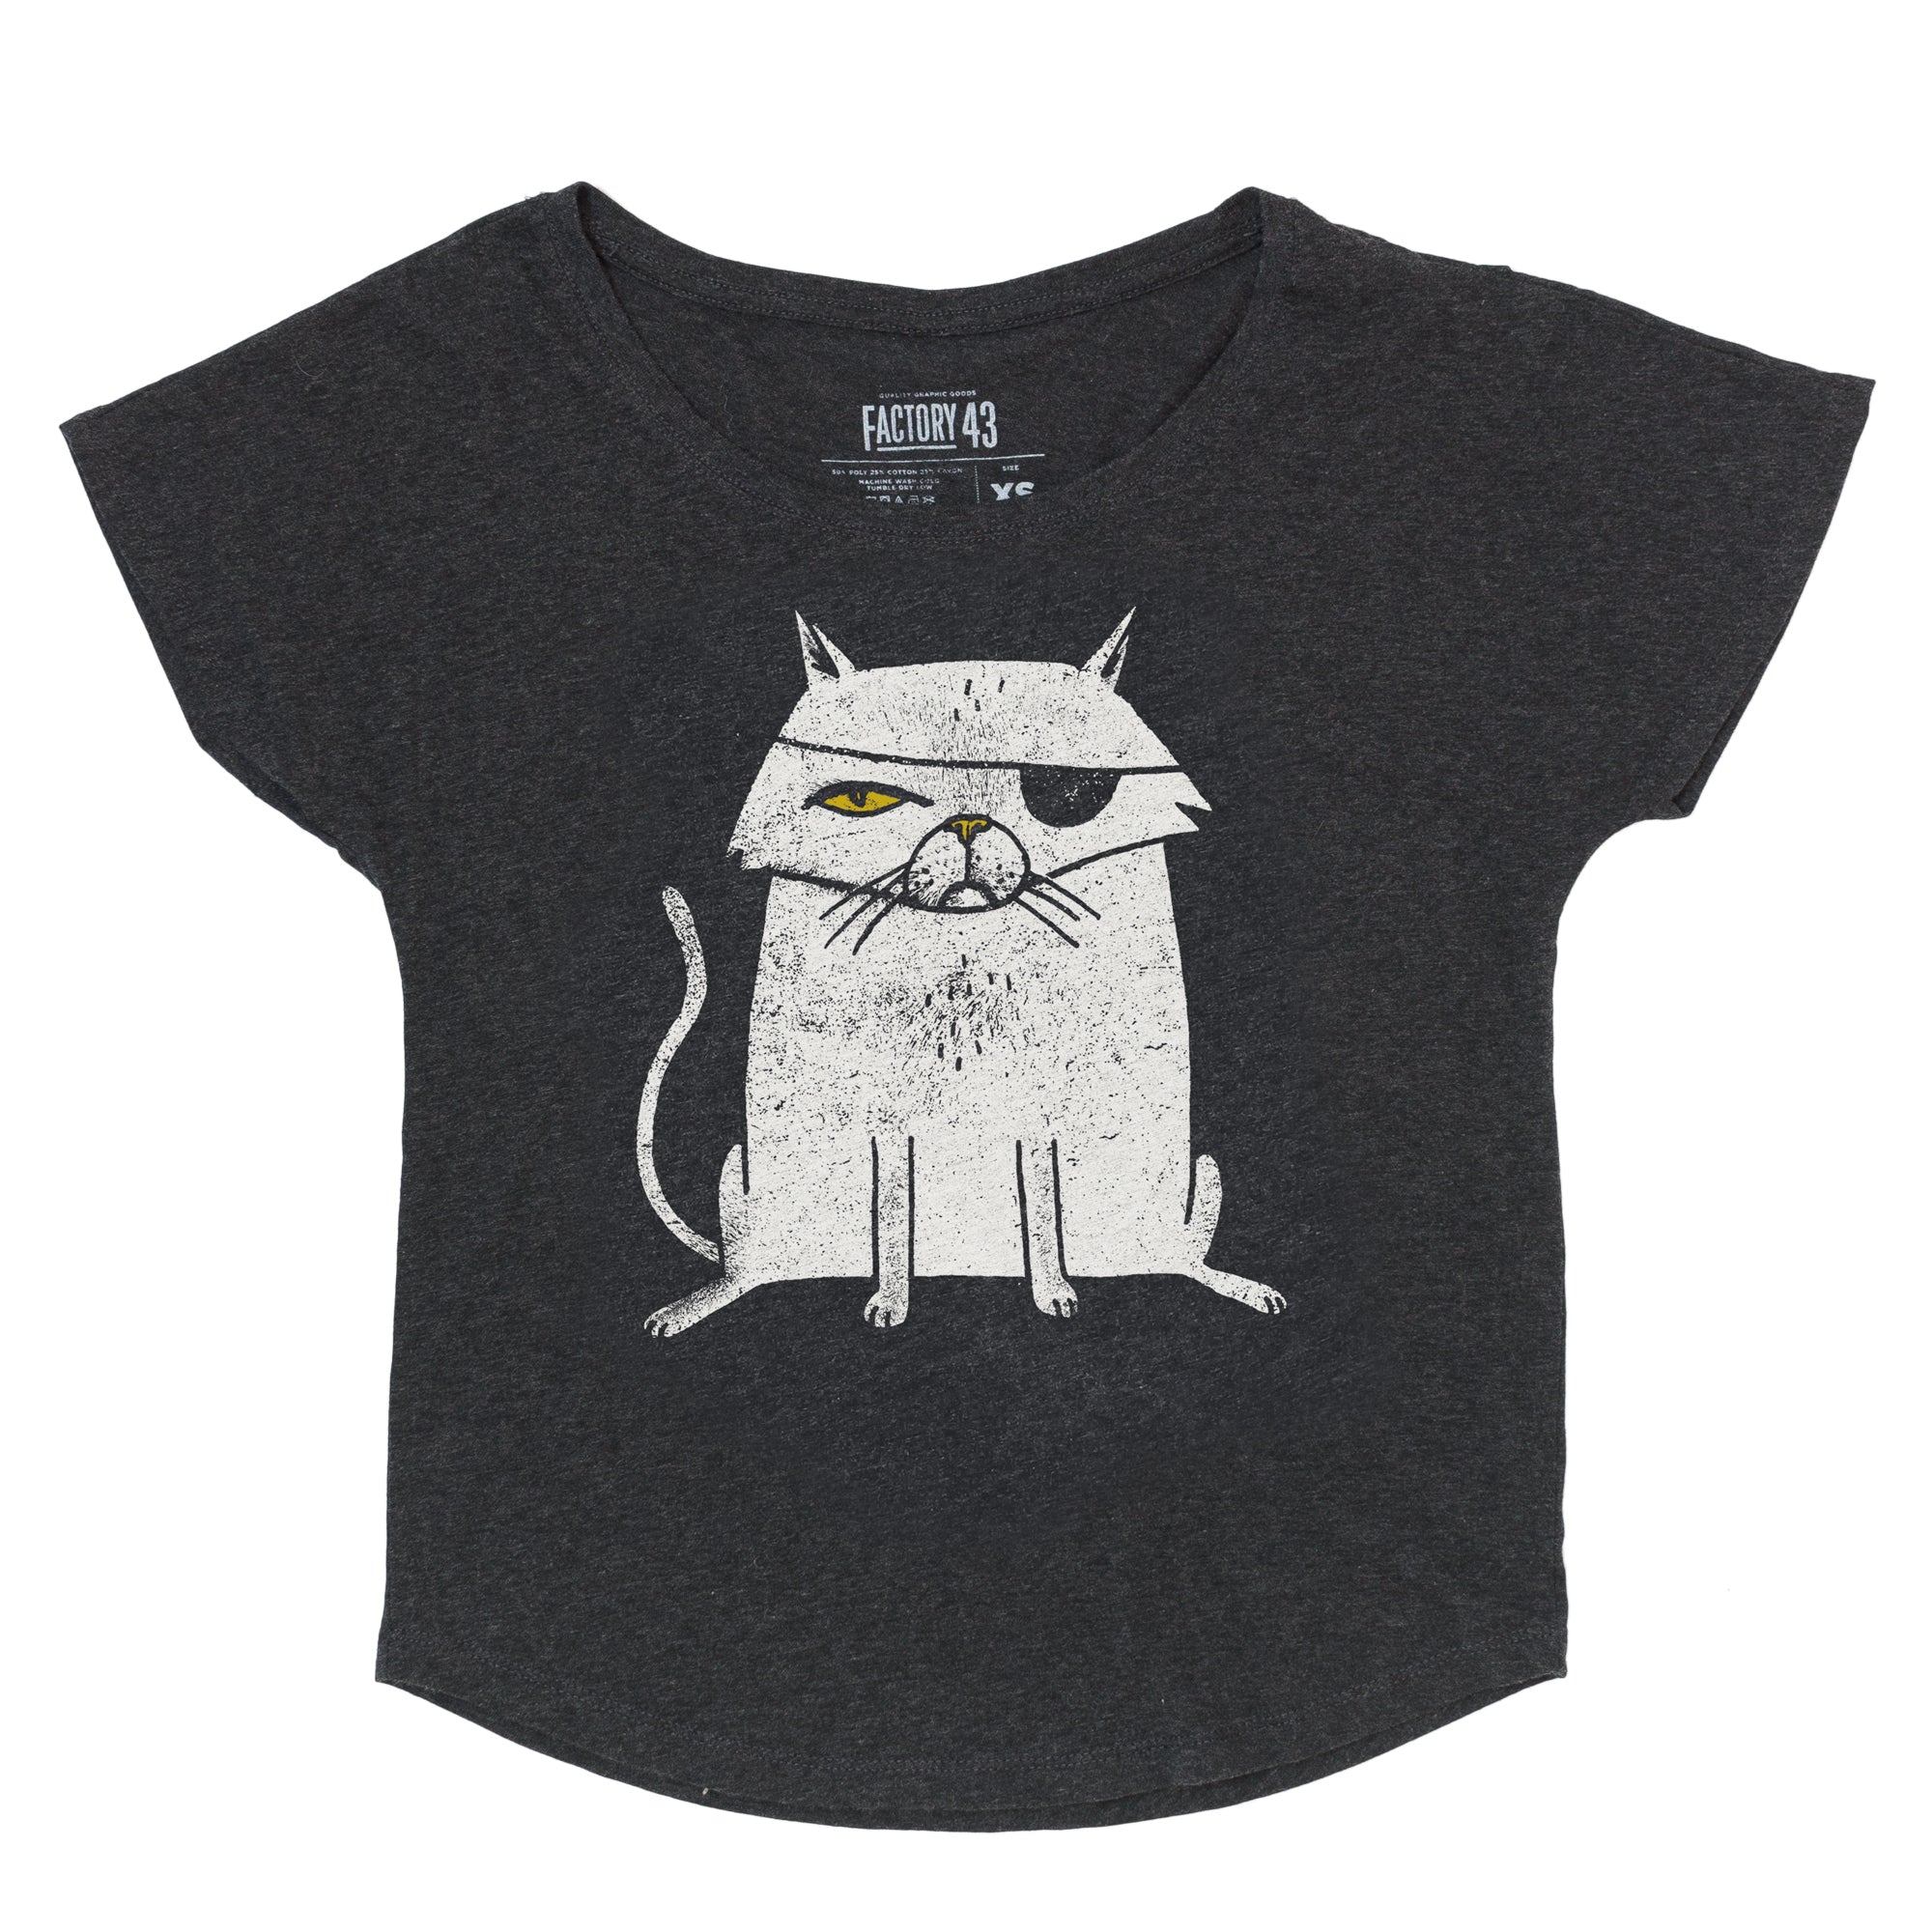 Dolman style of super soft gray black womens tshirt of a one eyed cat with an eyepatch. The cat looks like a pirate or an evil Bond villian. Factory 43 is a graphic design studio that makes art with a PNW vibe that reflects their Midwest/Southern roots. This cotton/polyester/rayon shirt printed in Seattle, Washington. The cat is white with a yellow eye and nose.